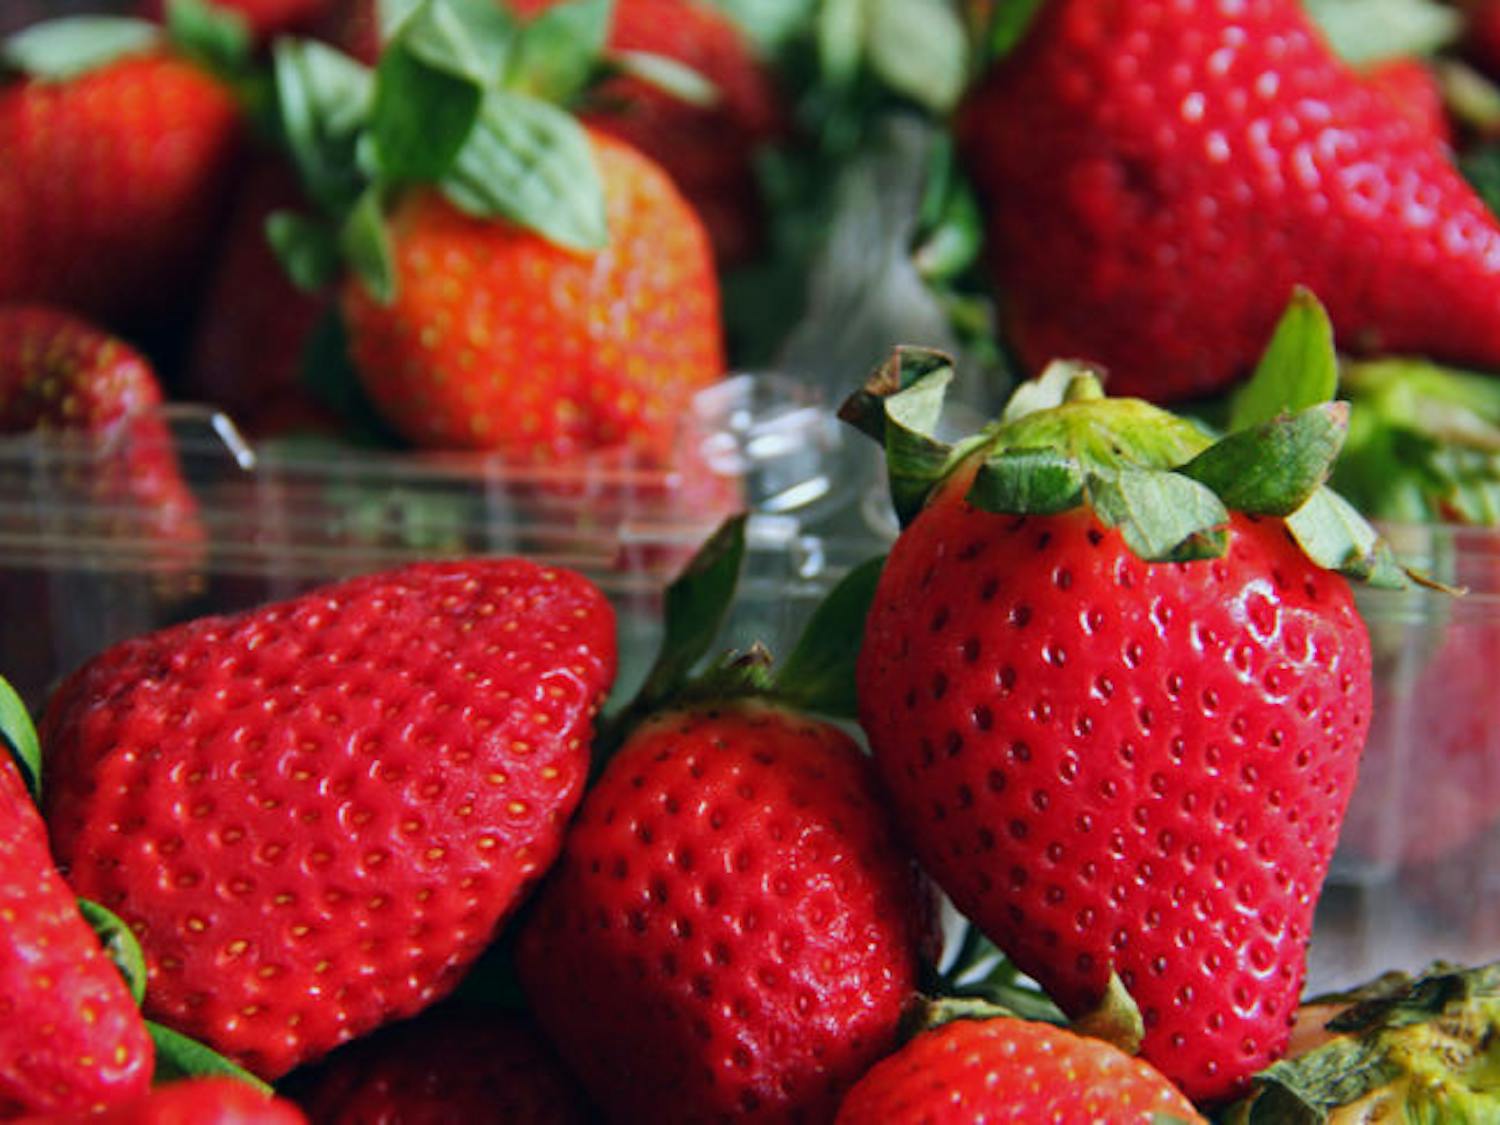 A new UF study has found compounds in strawberries that make the fruit taste sweeter. Researchers want to use this information to make a better artificial sweetener.